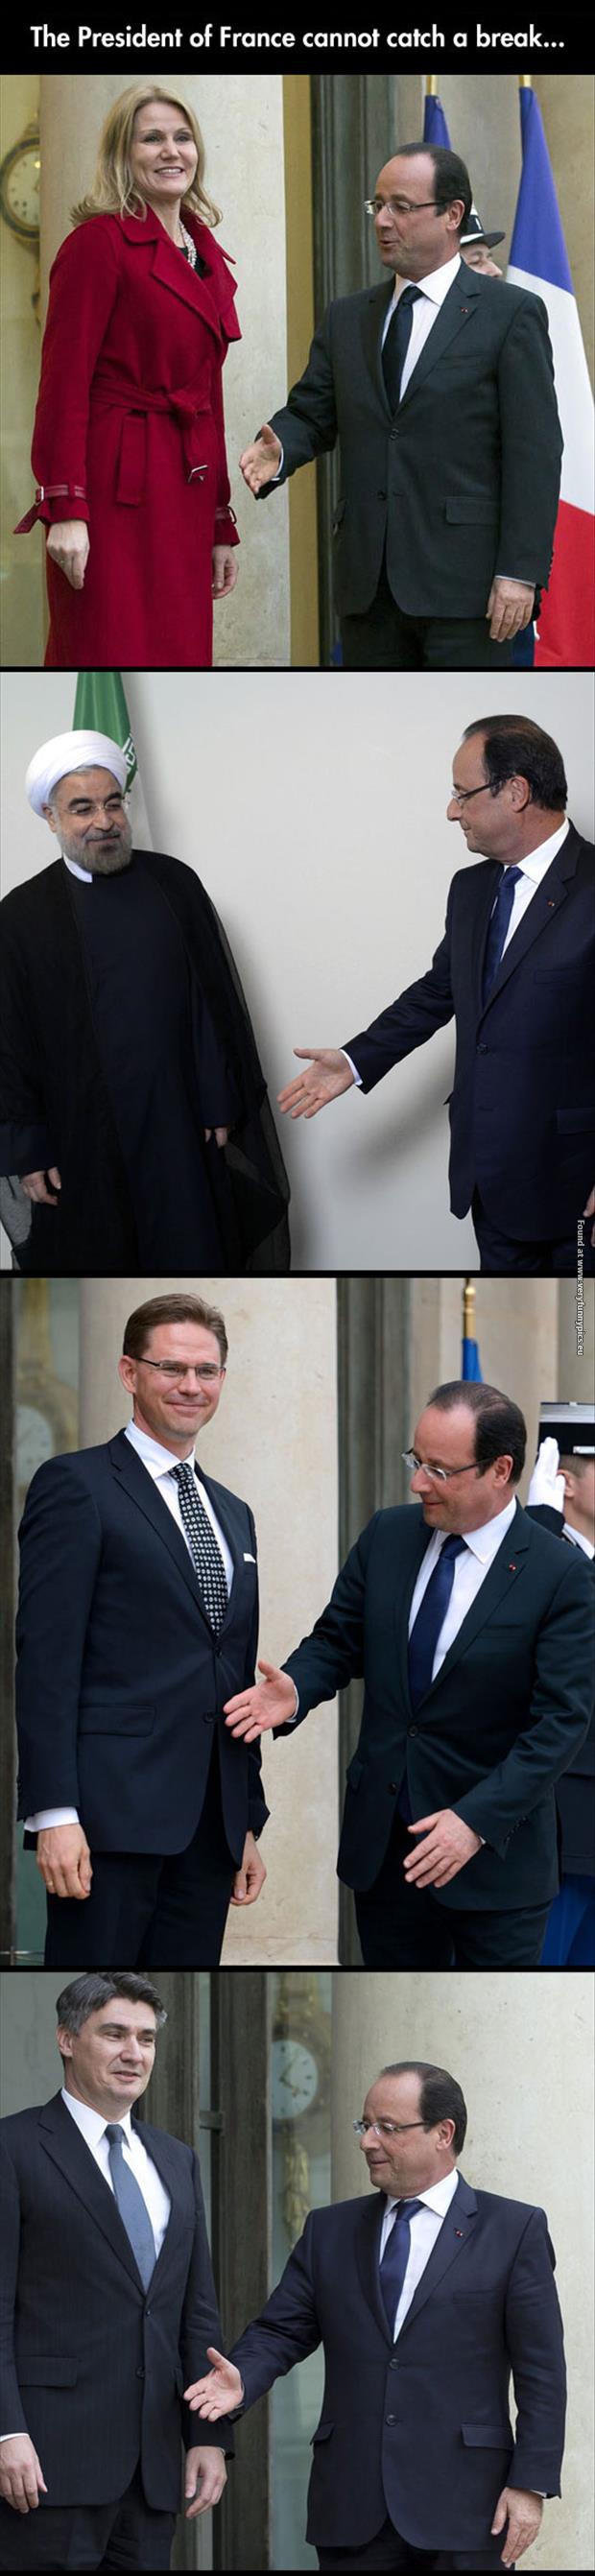 funny pictures the president of france handshake